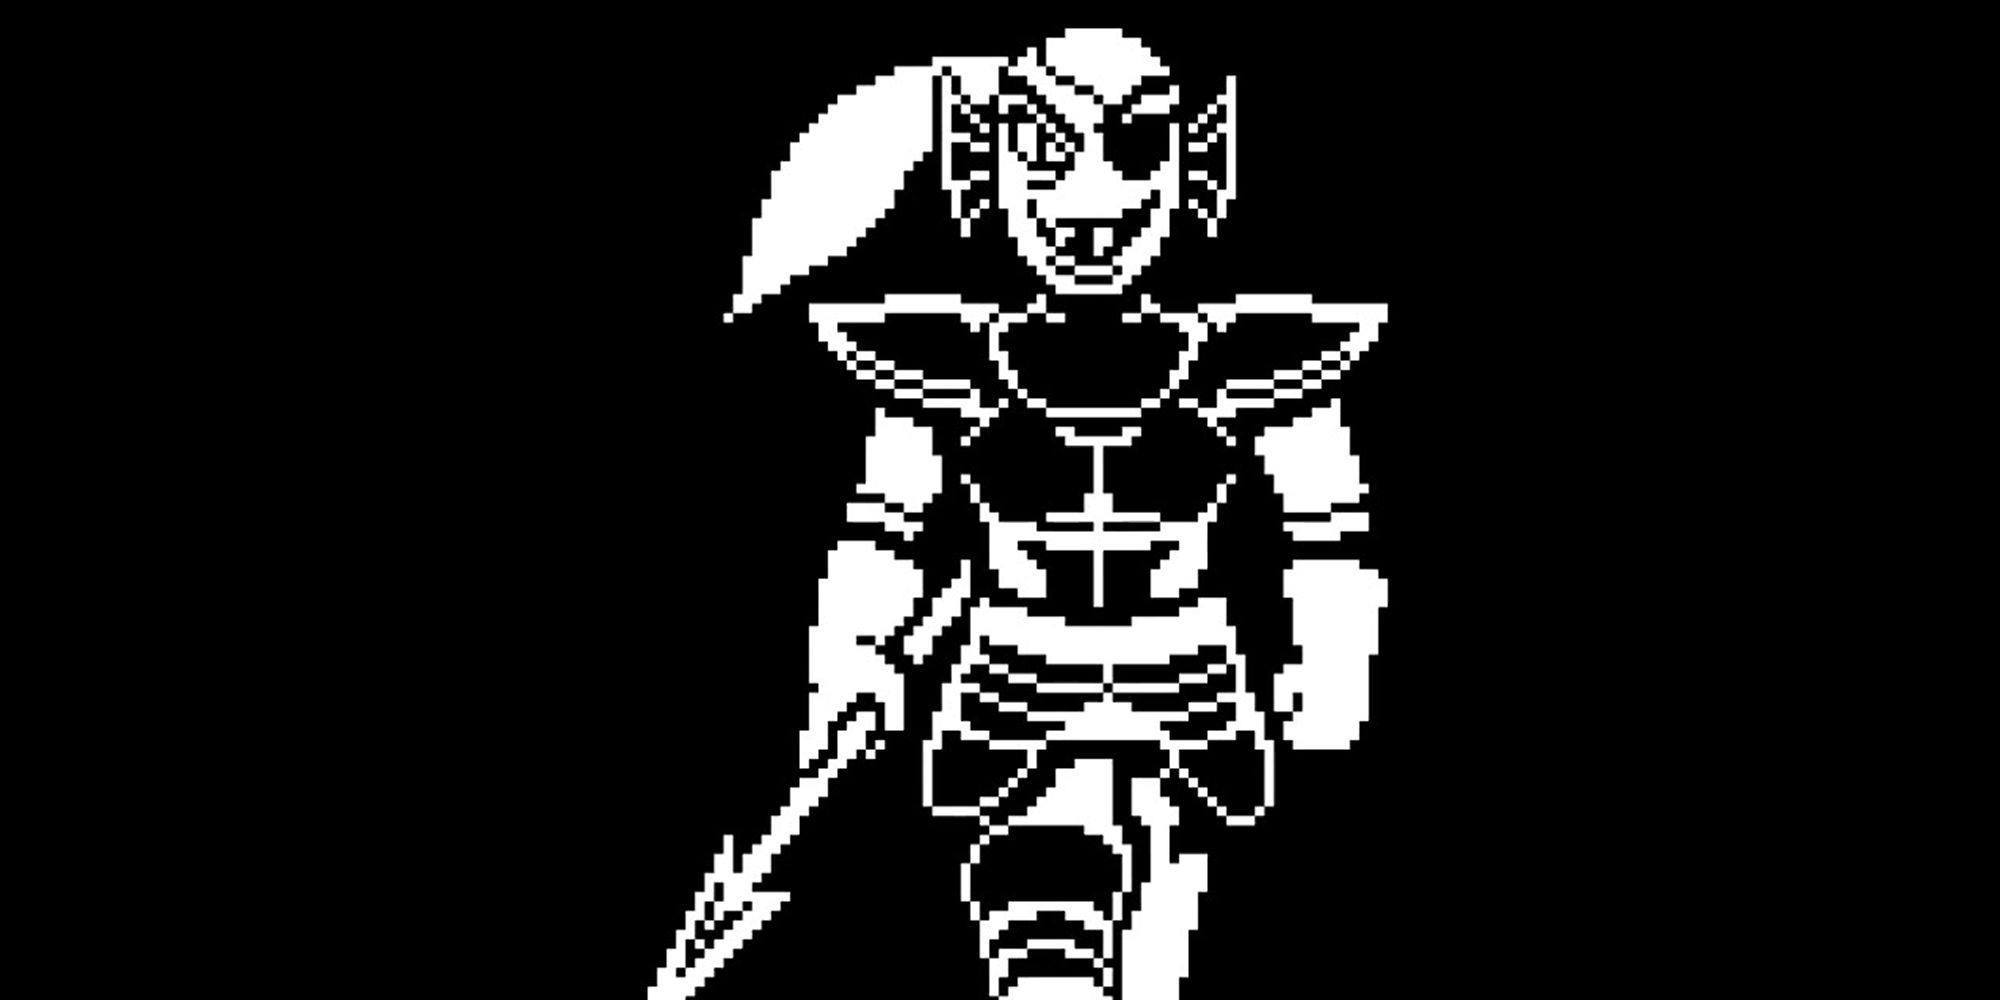 Undyne Appears To Fight